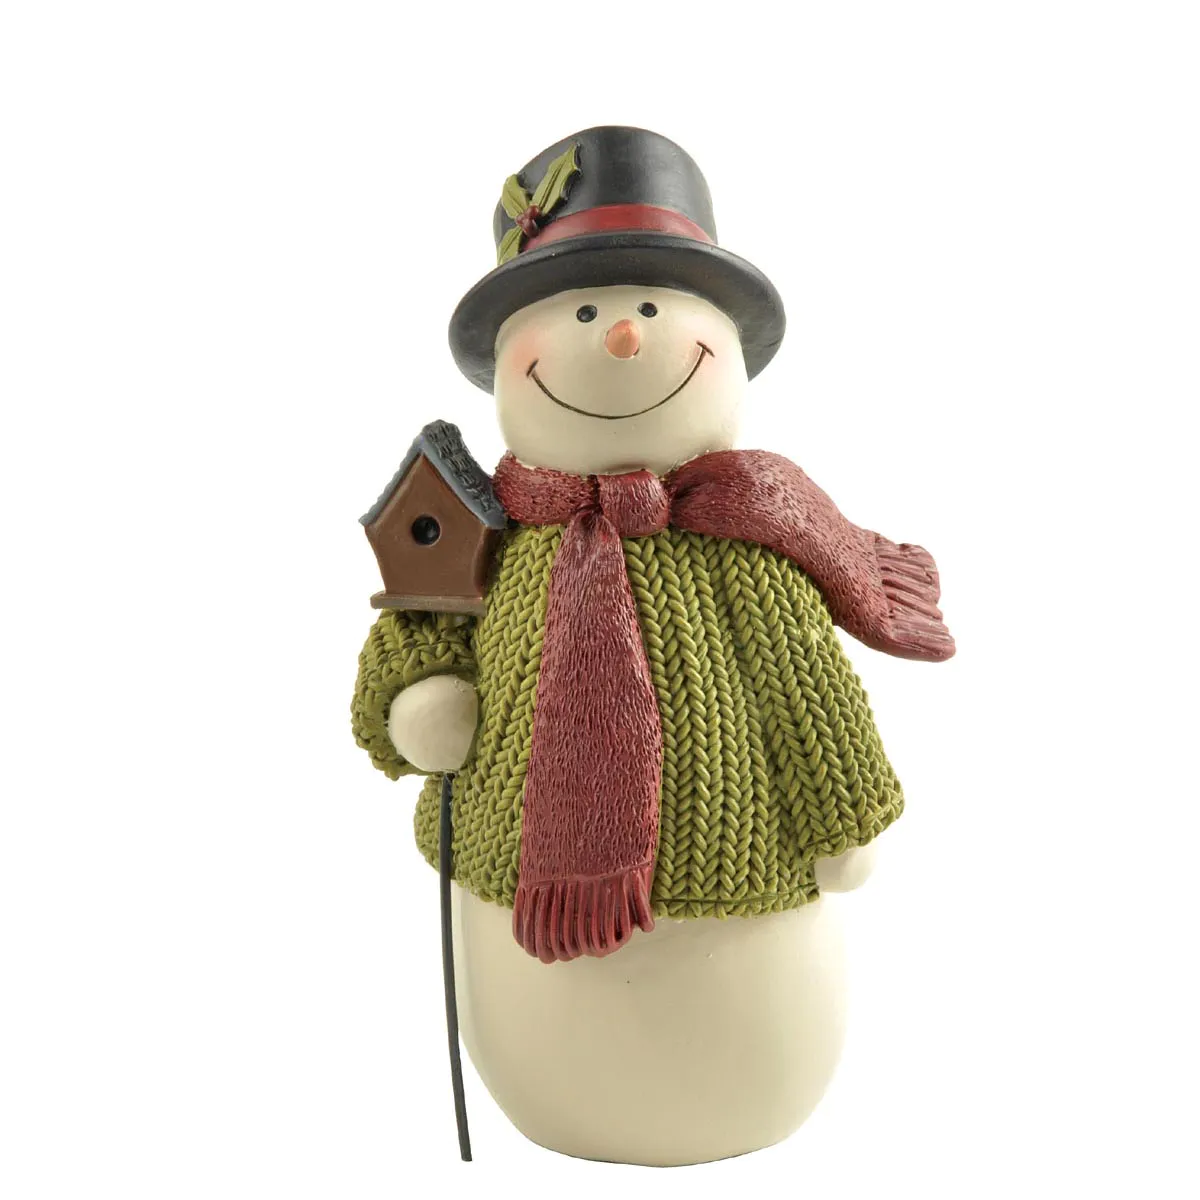 Collectible Christmas Ornaments Decoration Polyresin Snowman figurine with bird house